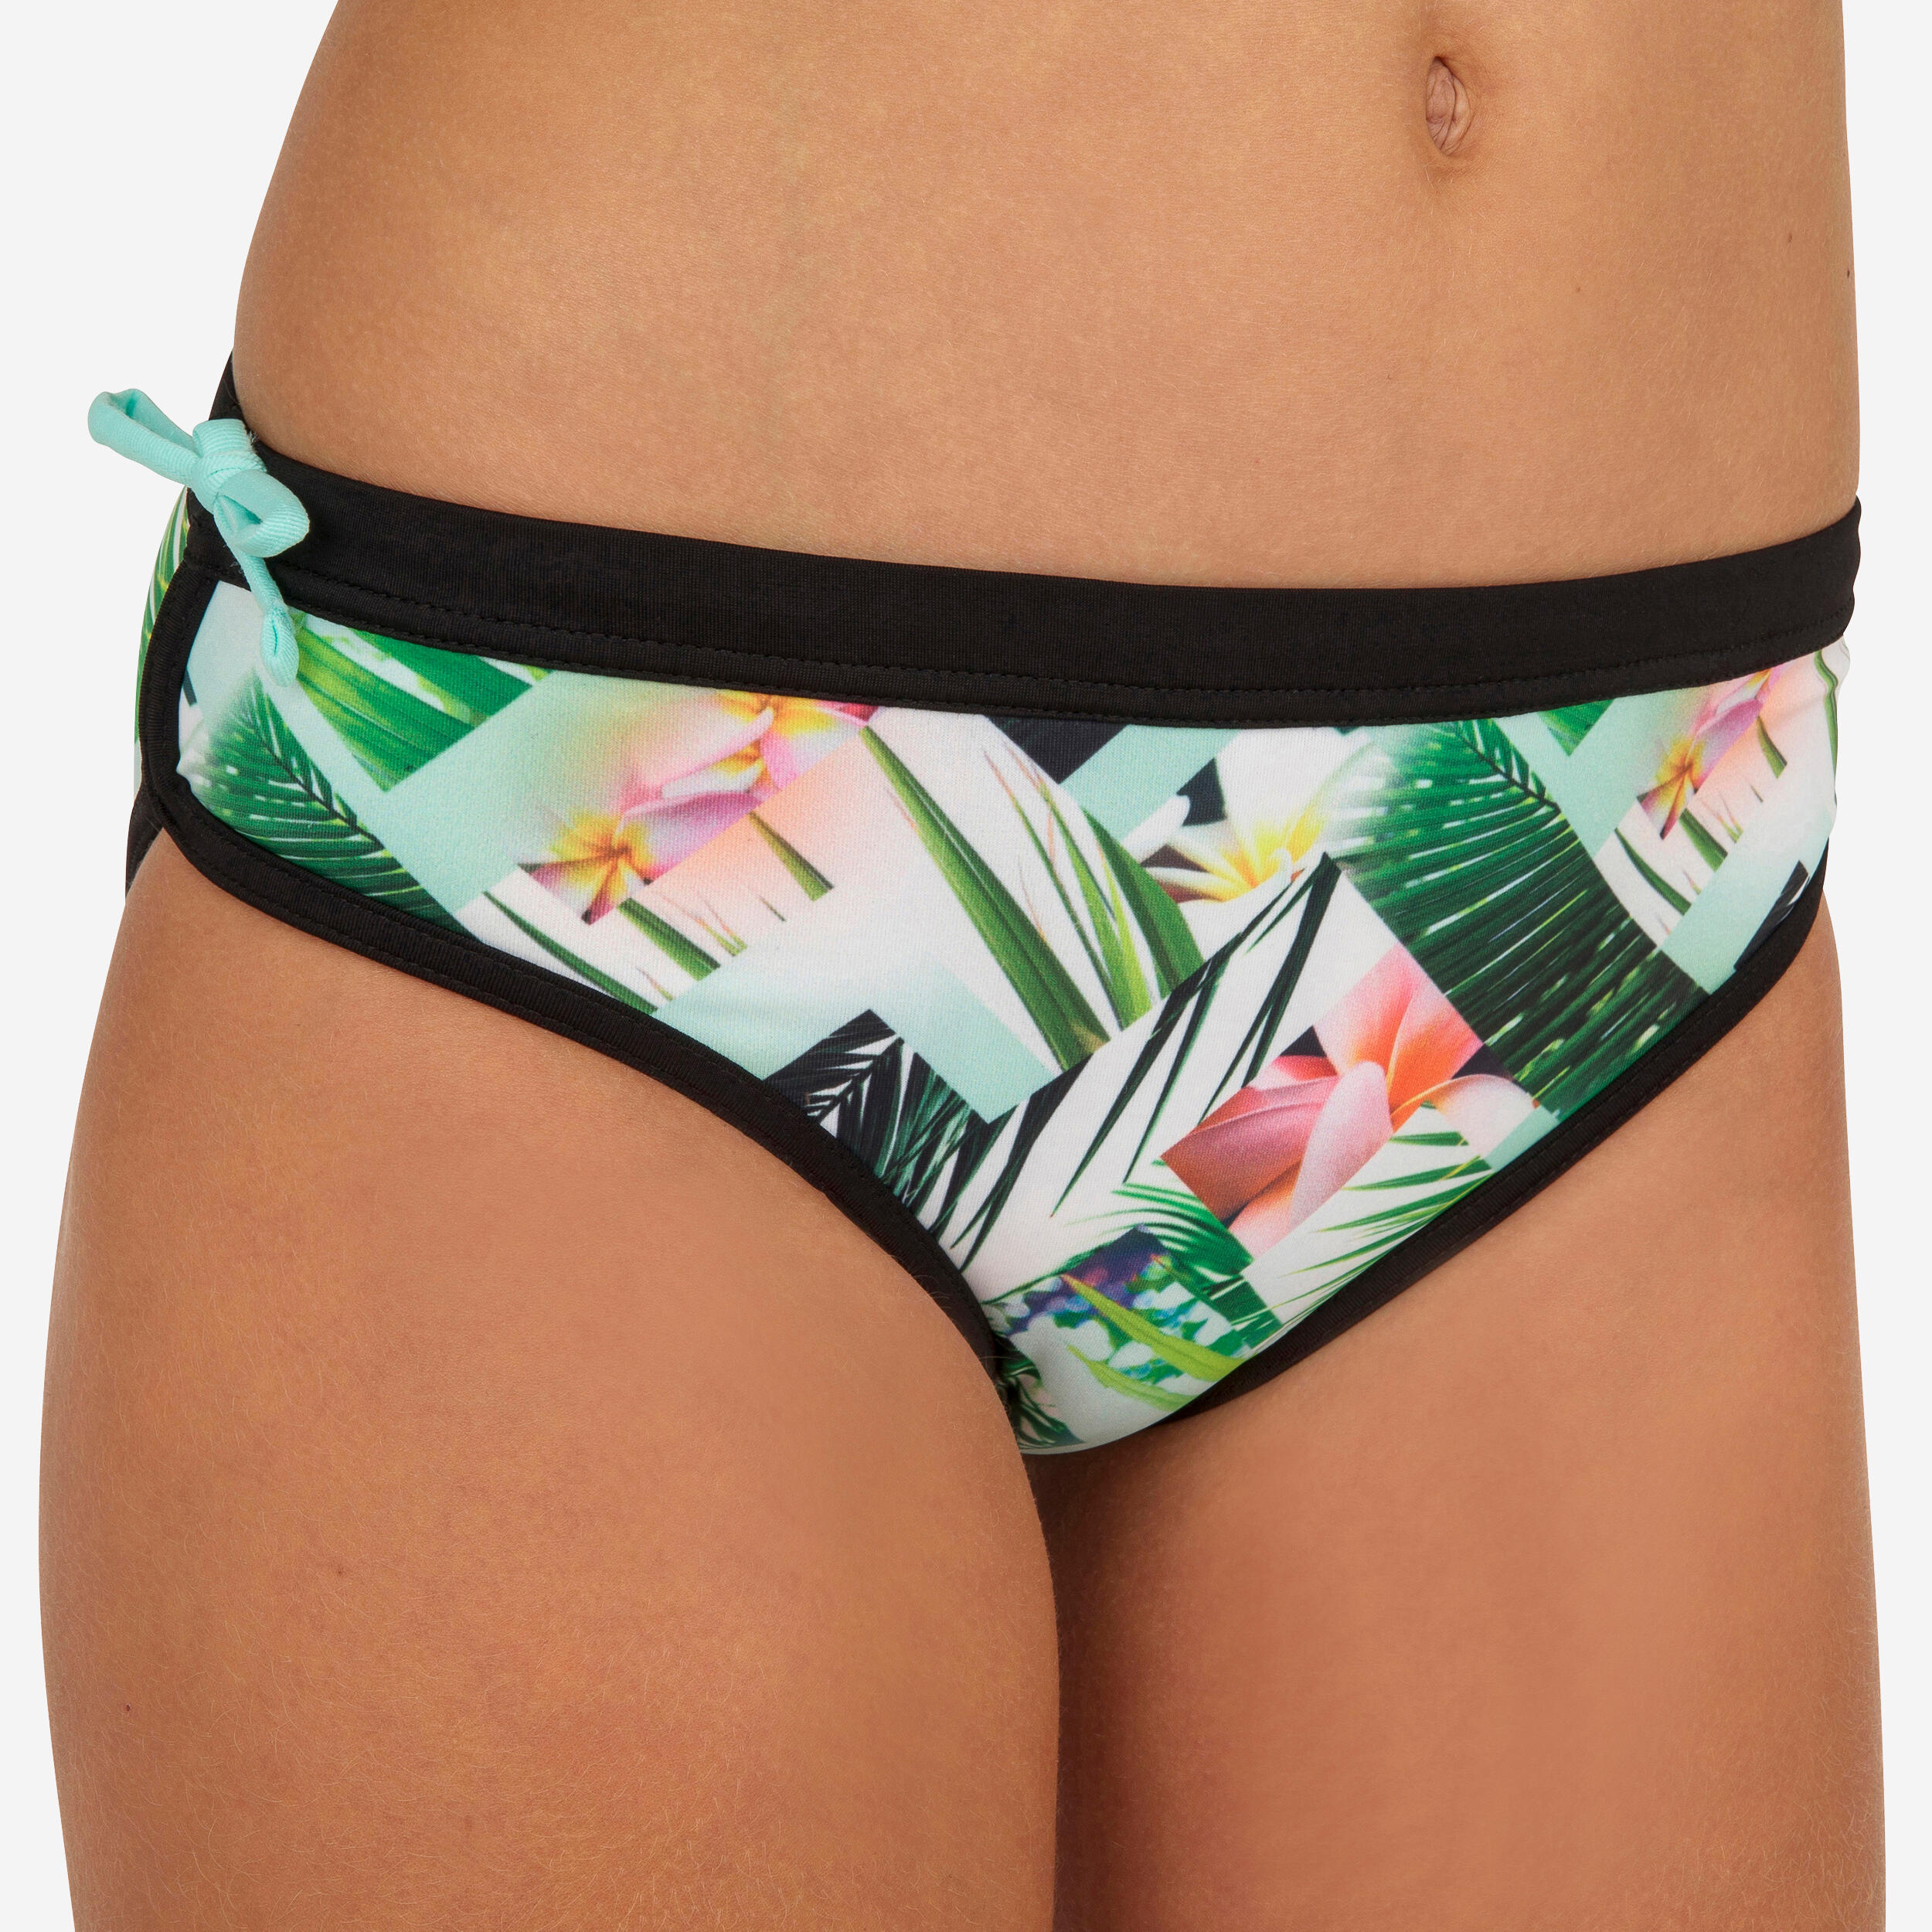 Image of Kids' Swimsuit Bottoms - 900